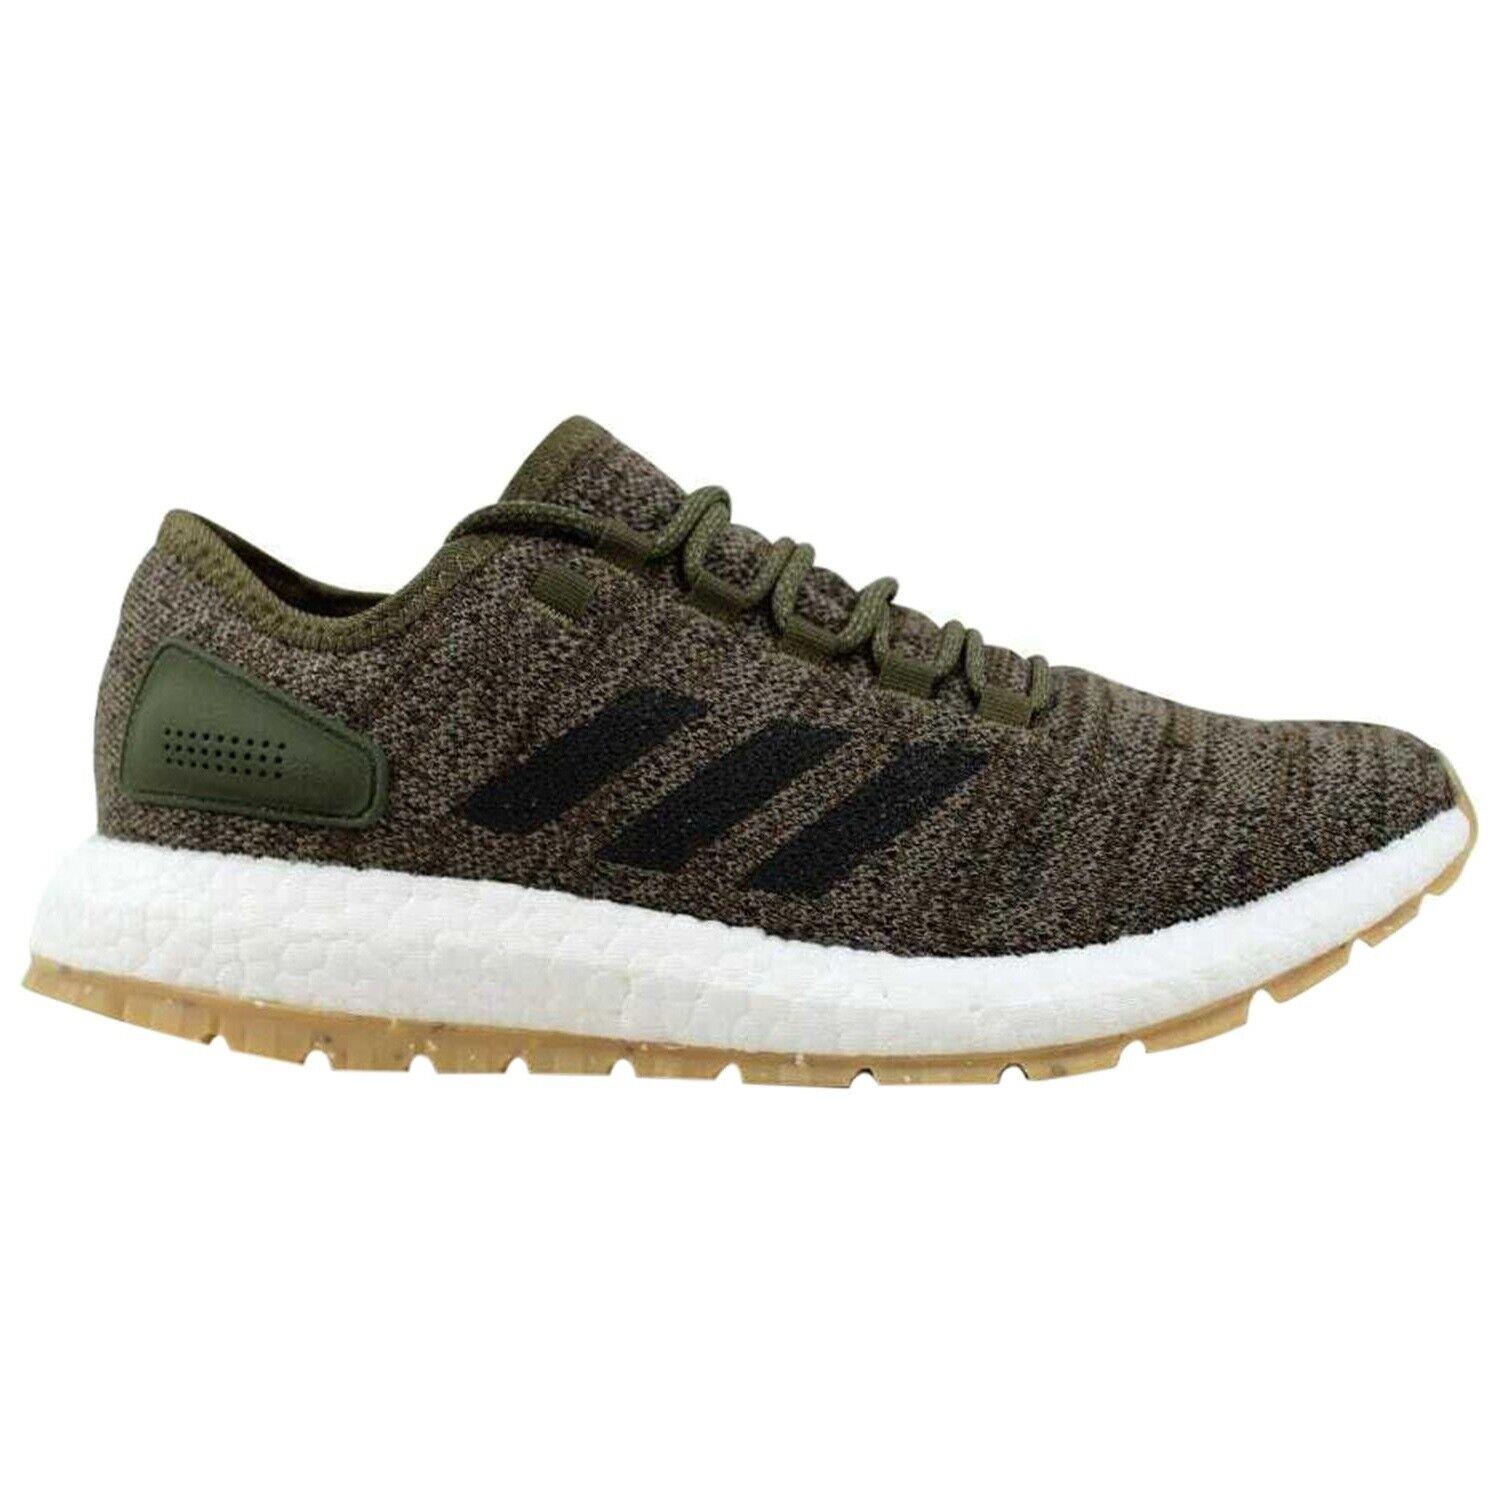 Adidas Pure Boost Atr All Terrain Mens S80784 Trace Cargo Running Shoes Size 8